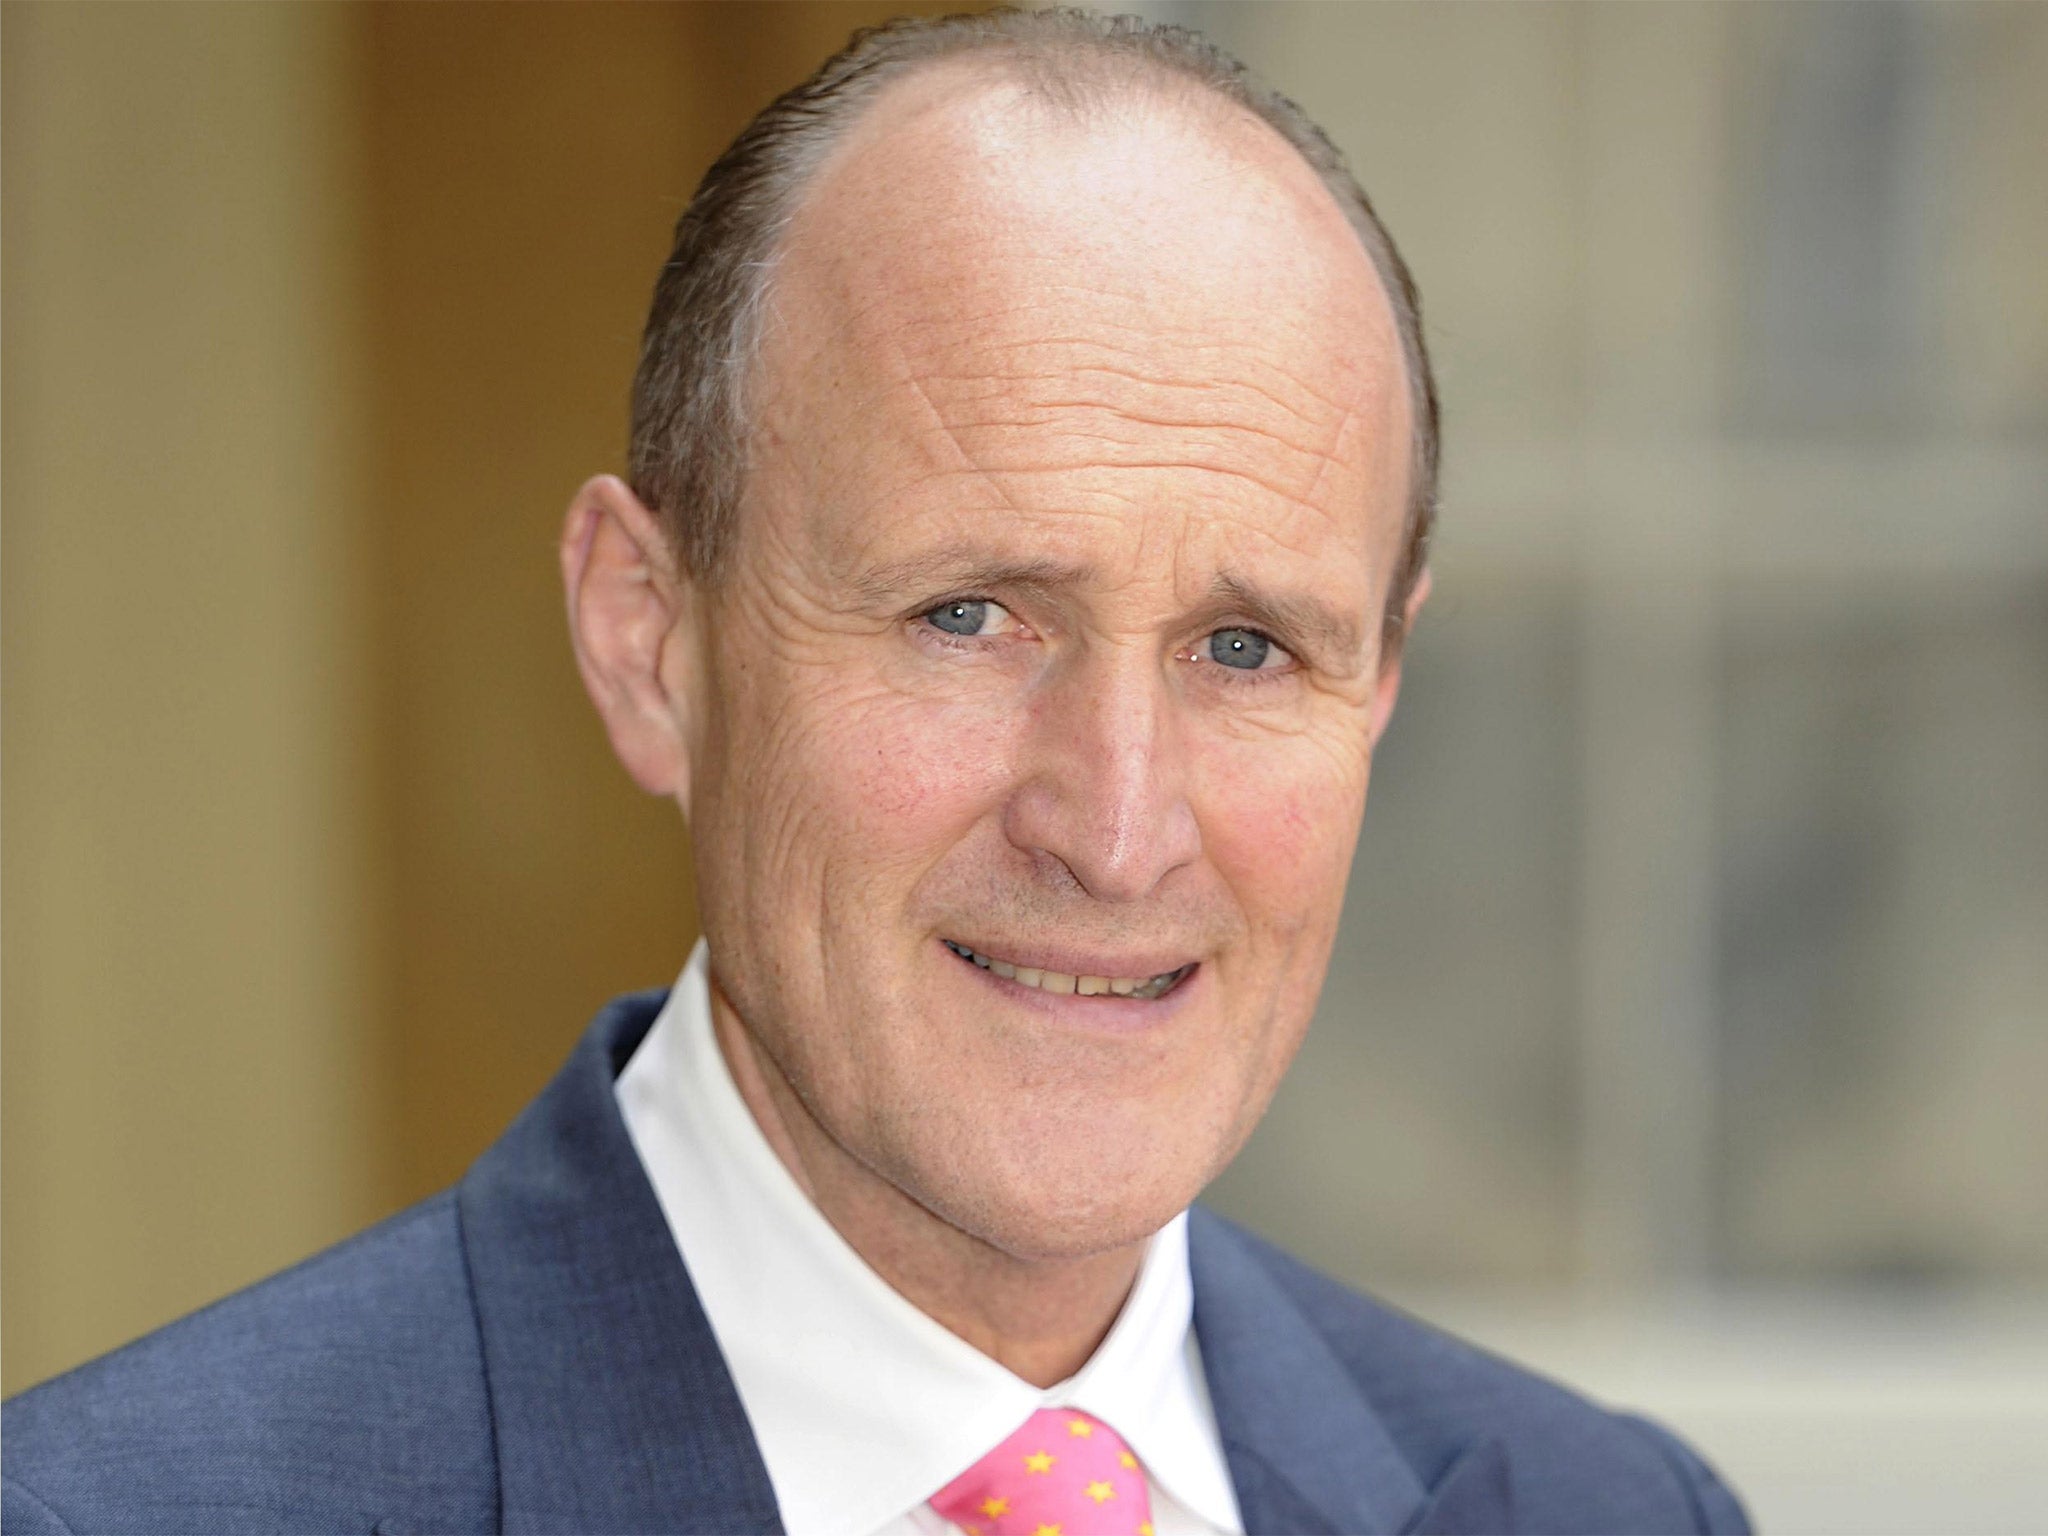 Sir Peter Bazalgette will become the next chairman of broadcaster ITV